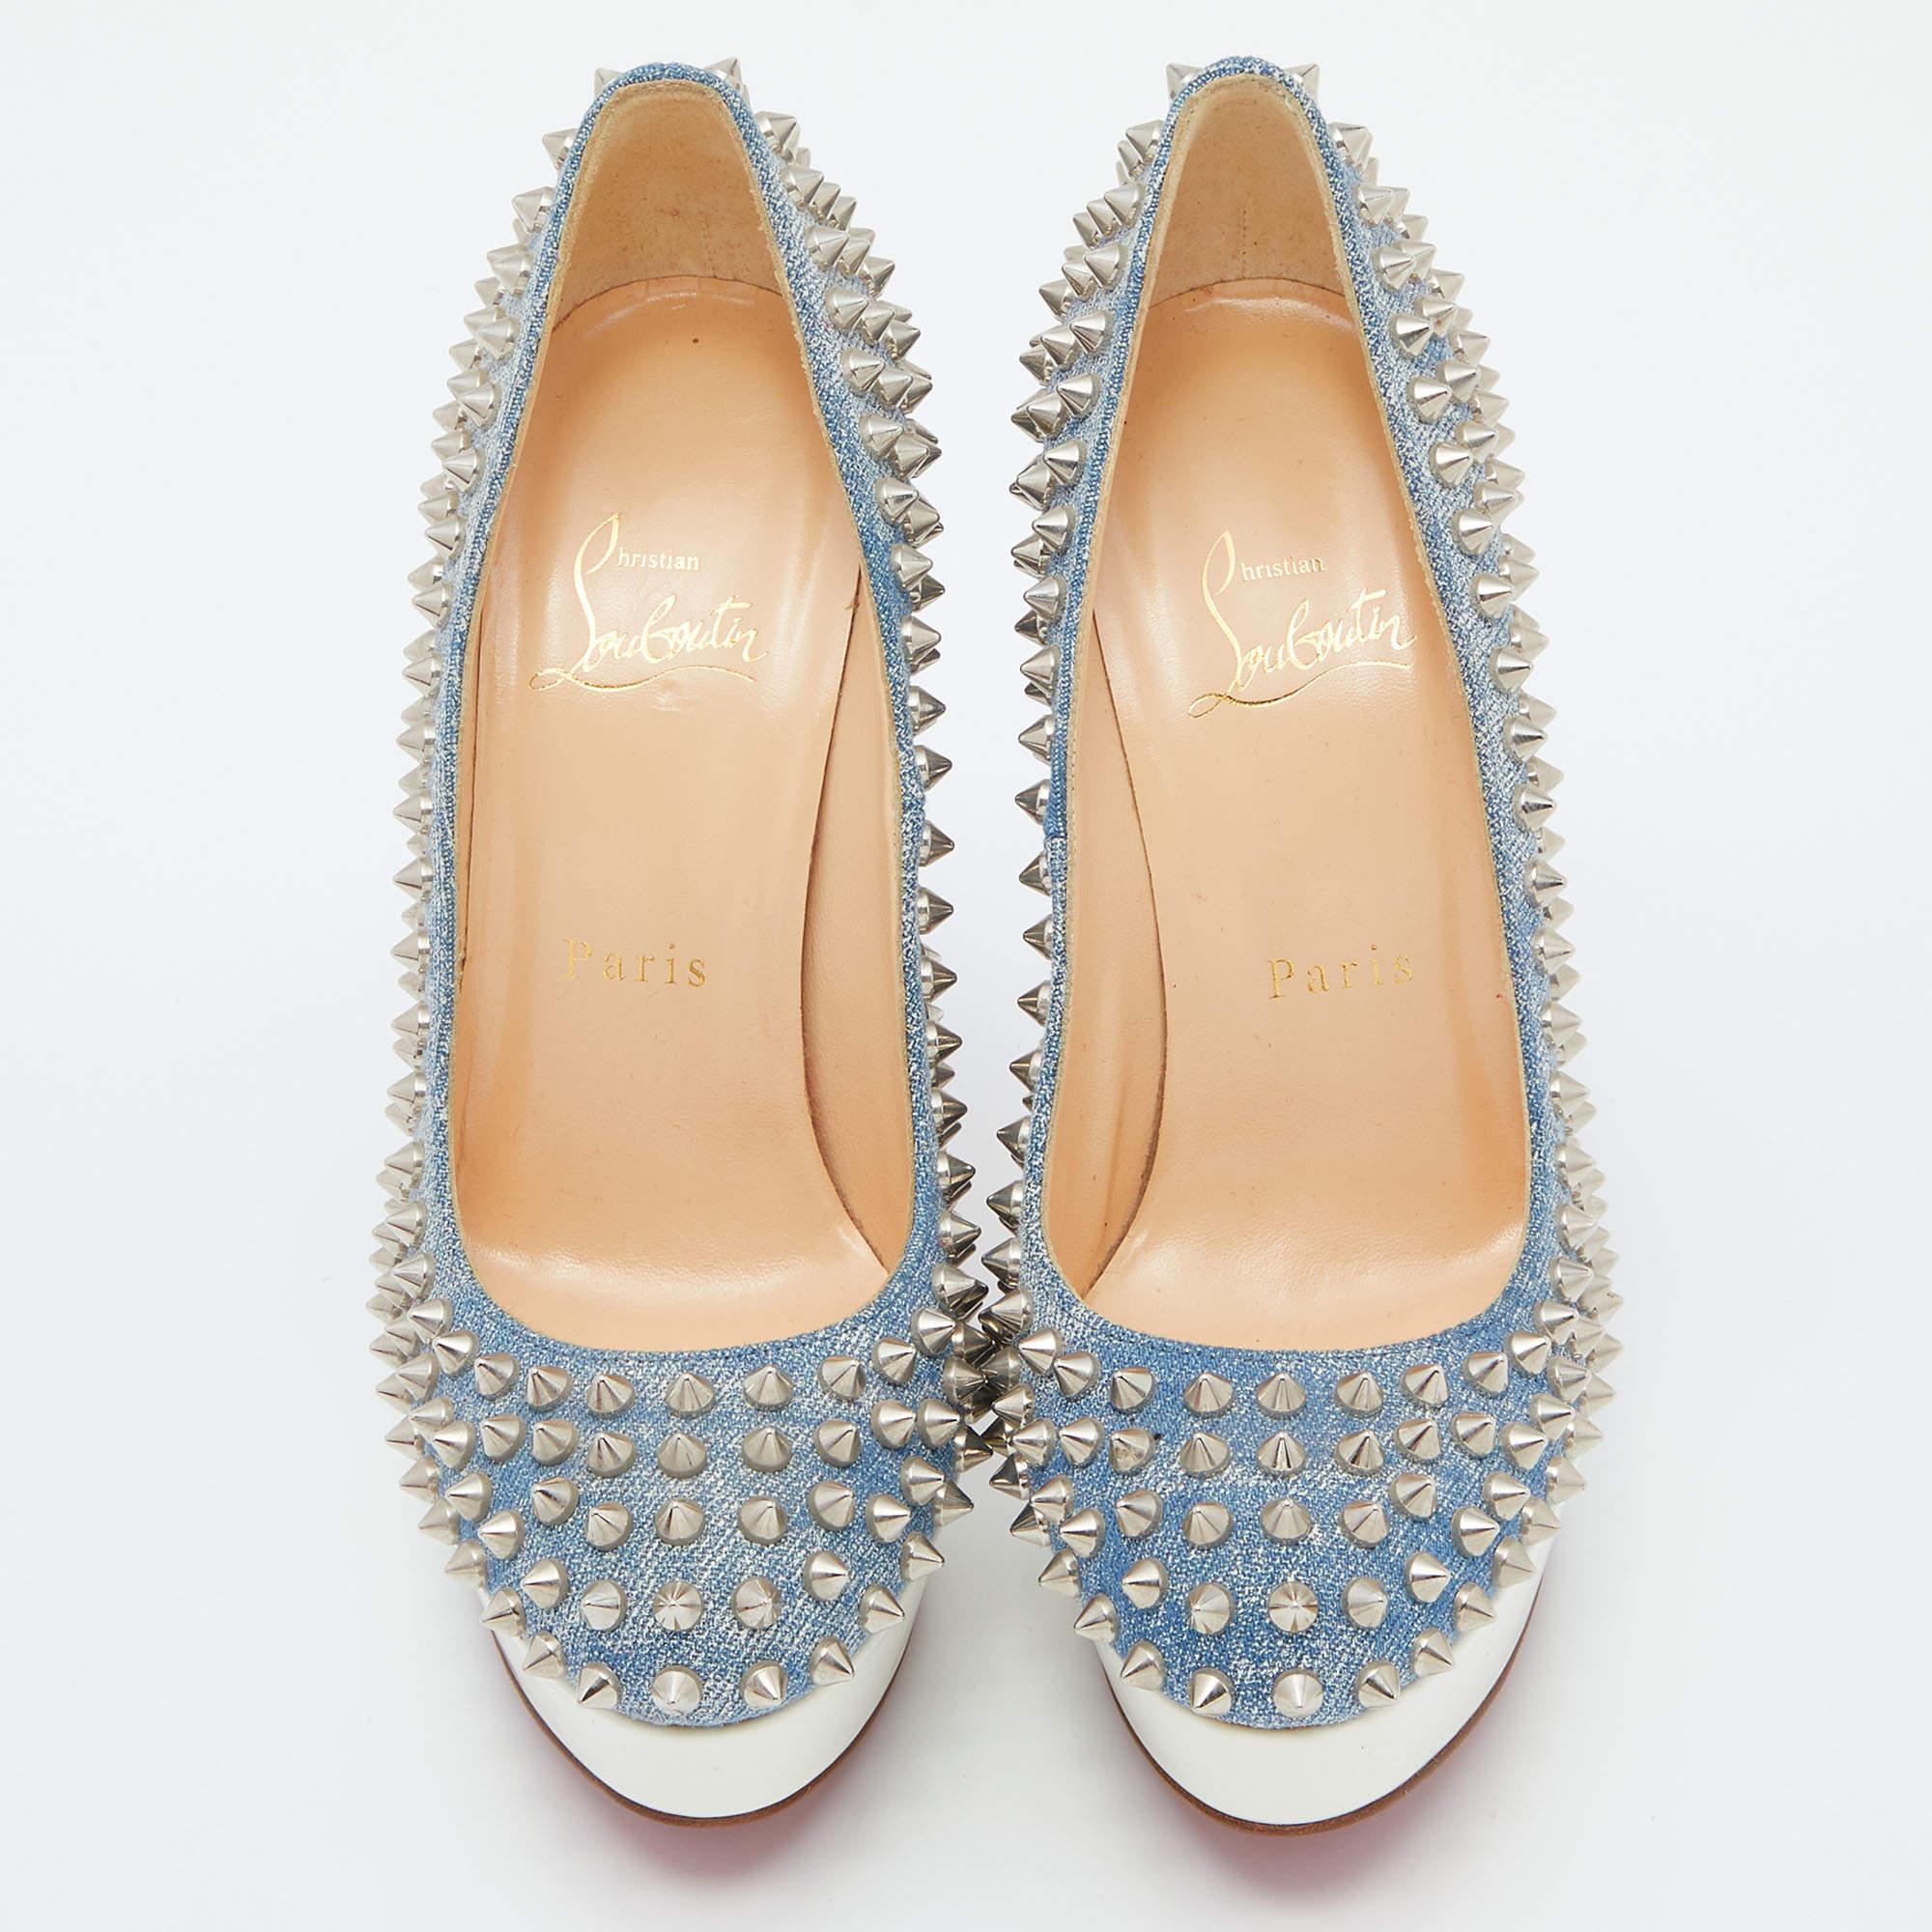 The Christian Louboutin pumps are a striking footwear choice. Made from light blue denim, these pumps feature the iconic red sole and are adorned with edgy silver spikes. They blend luxury and attitude, adding a touch of glamour to any